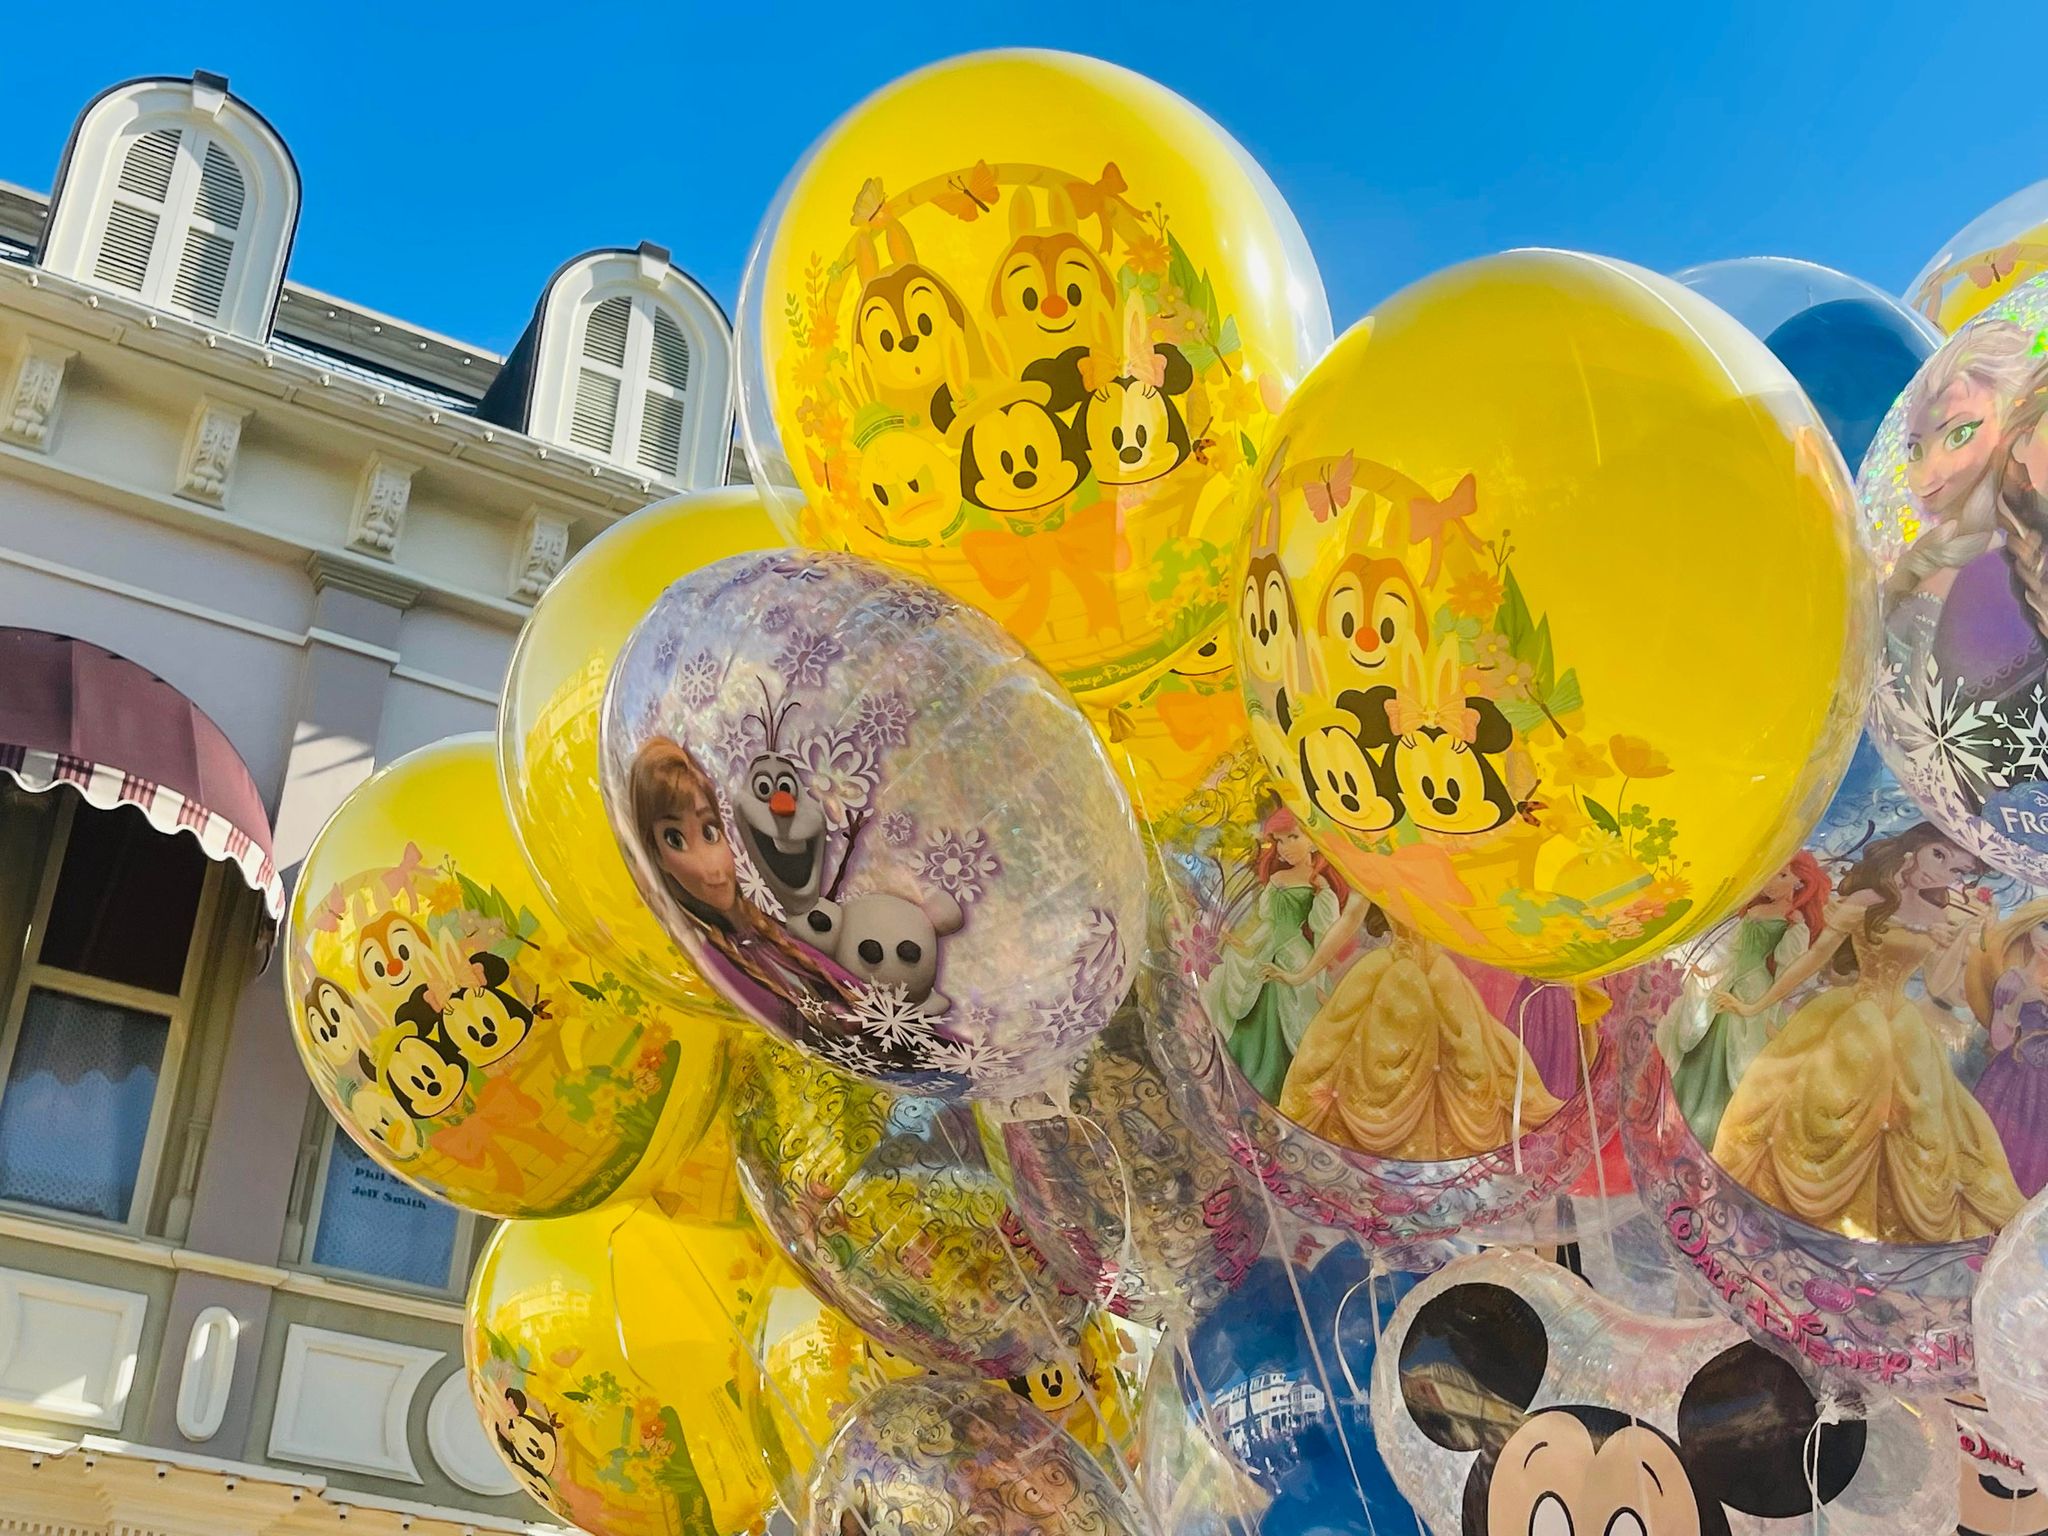 PHOTOS! Orange and Golden Yellow Mickey Balloons Are Now Available